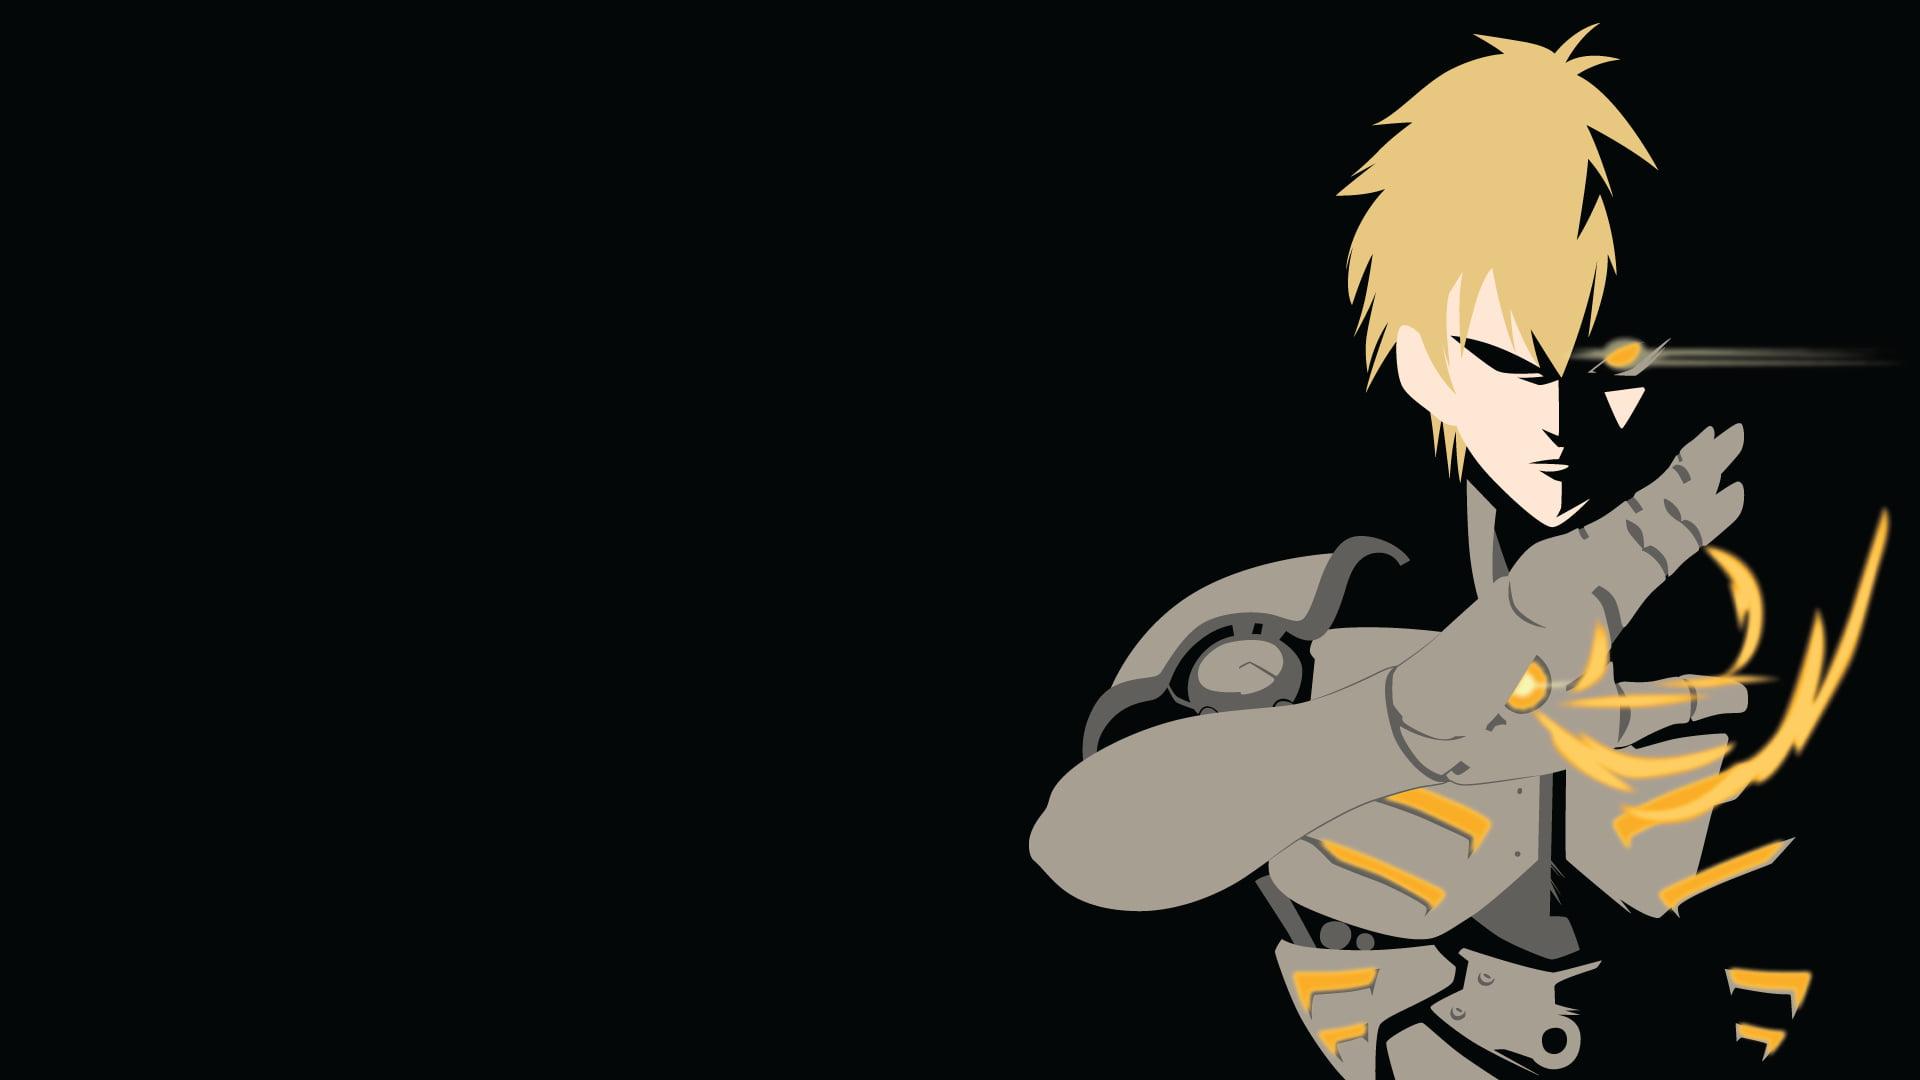 Genos From One Punch Man Illustration, Genos, One Punch Man